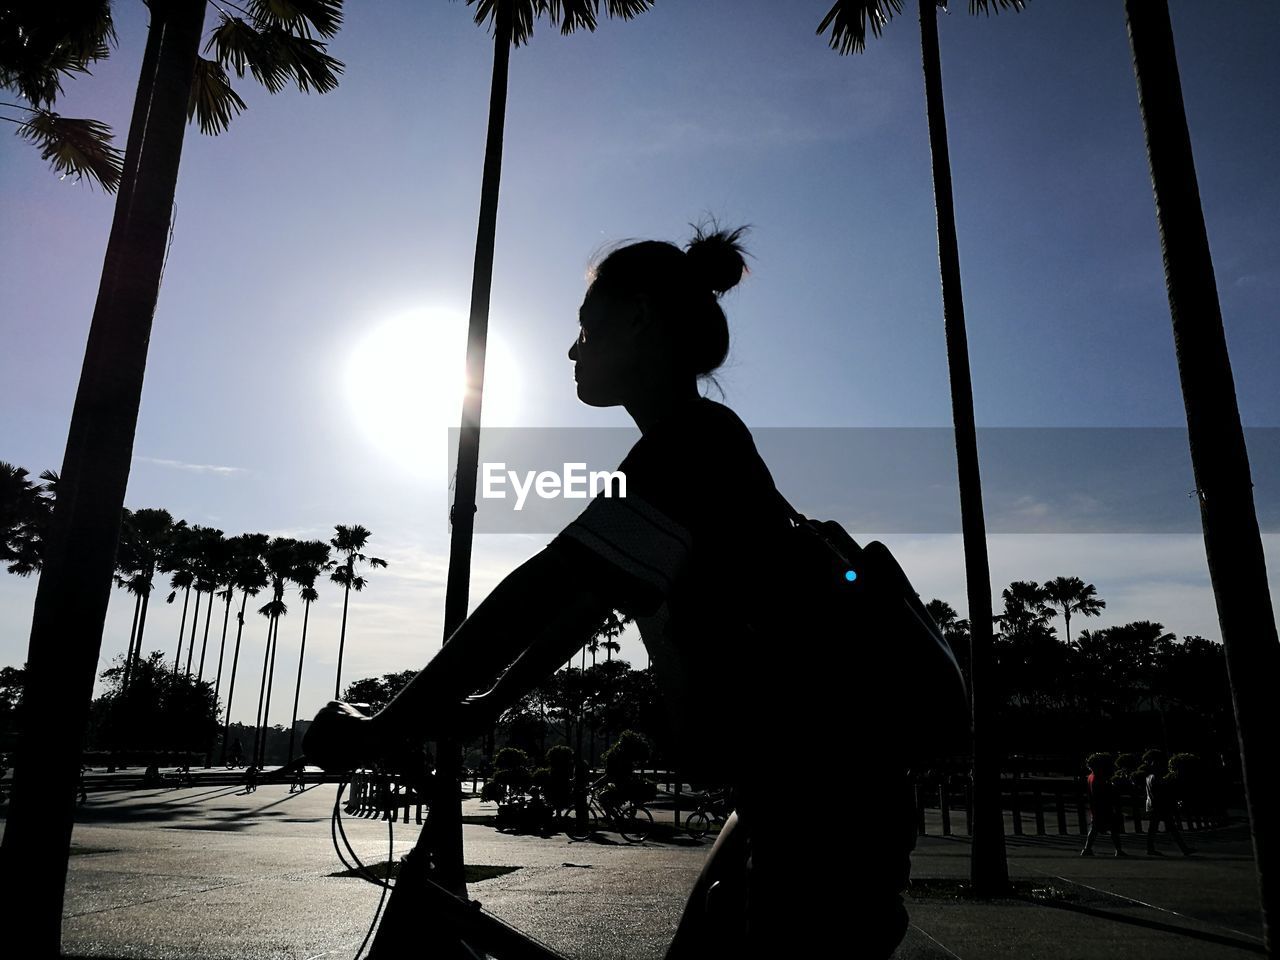 Silhouette woman riding bicycle on street during sunny day